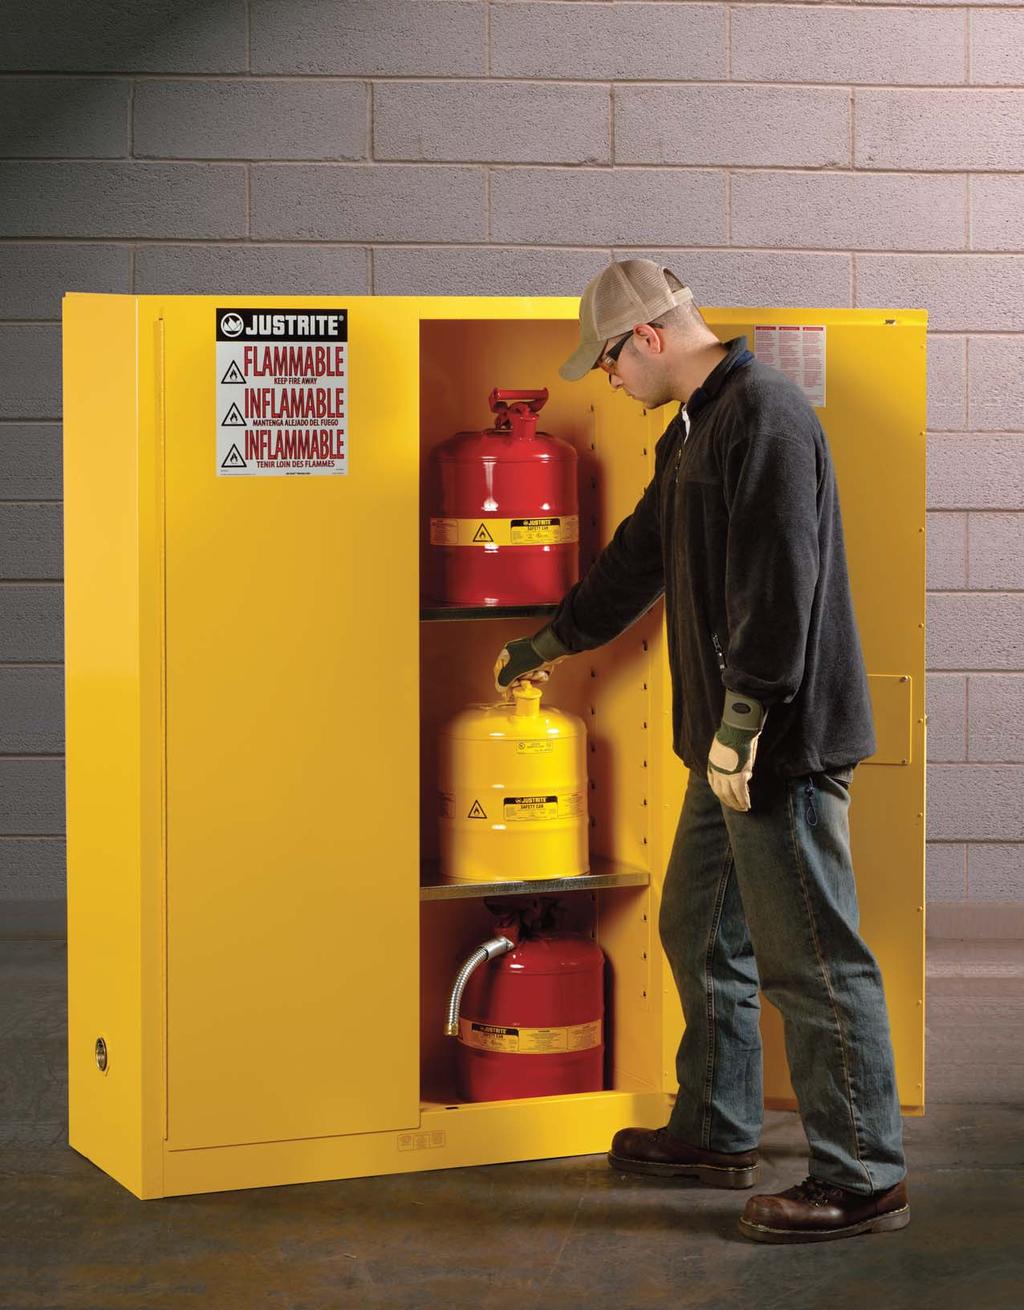 UNDERSTANDING SAFETY CABINETS Why use safety cabinets? What makes a safety cabinet safe?